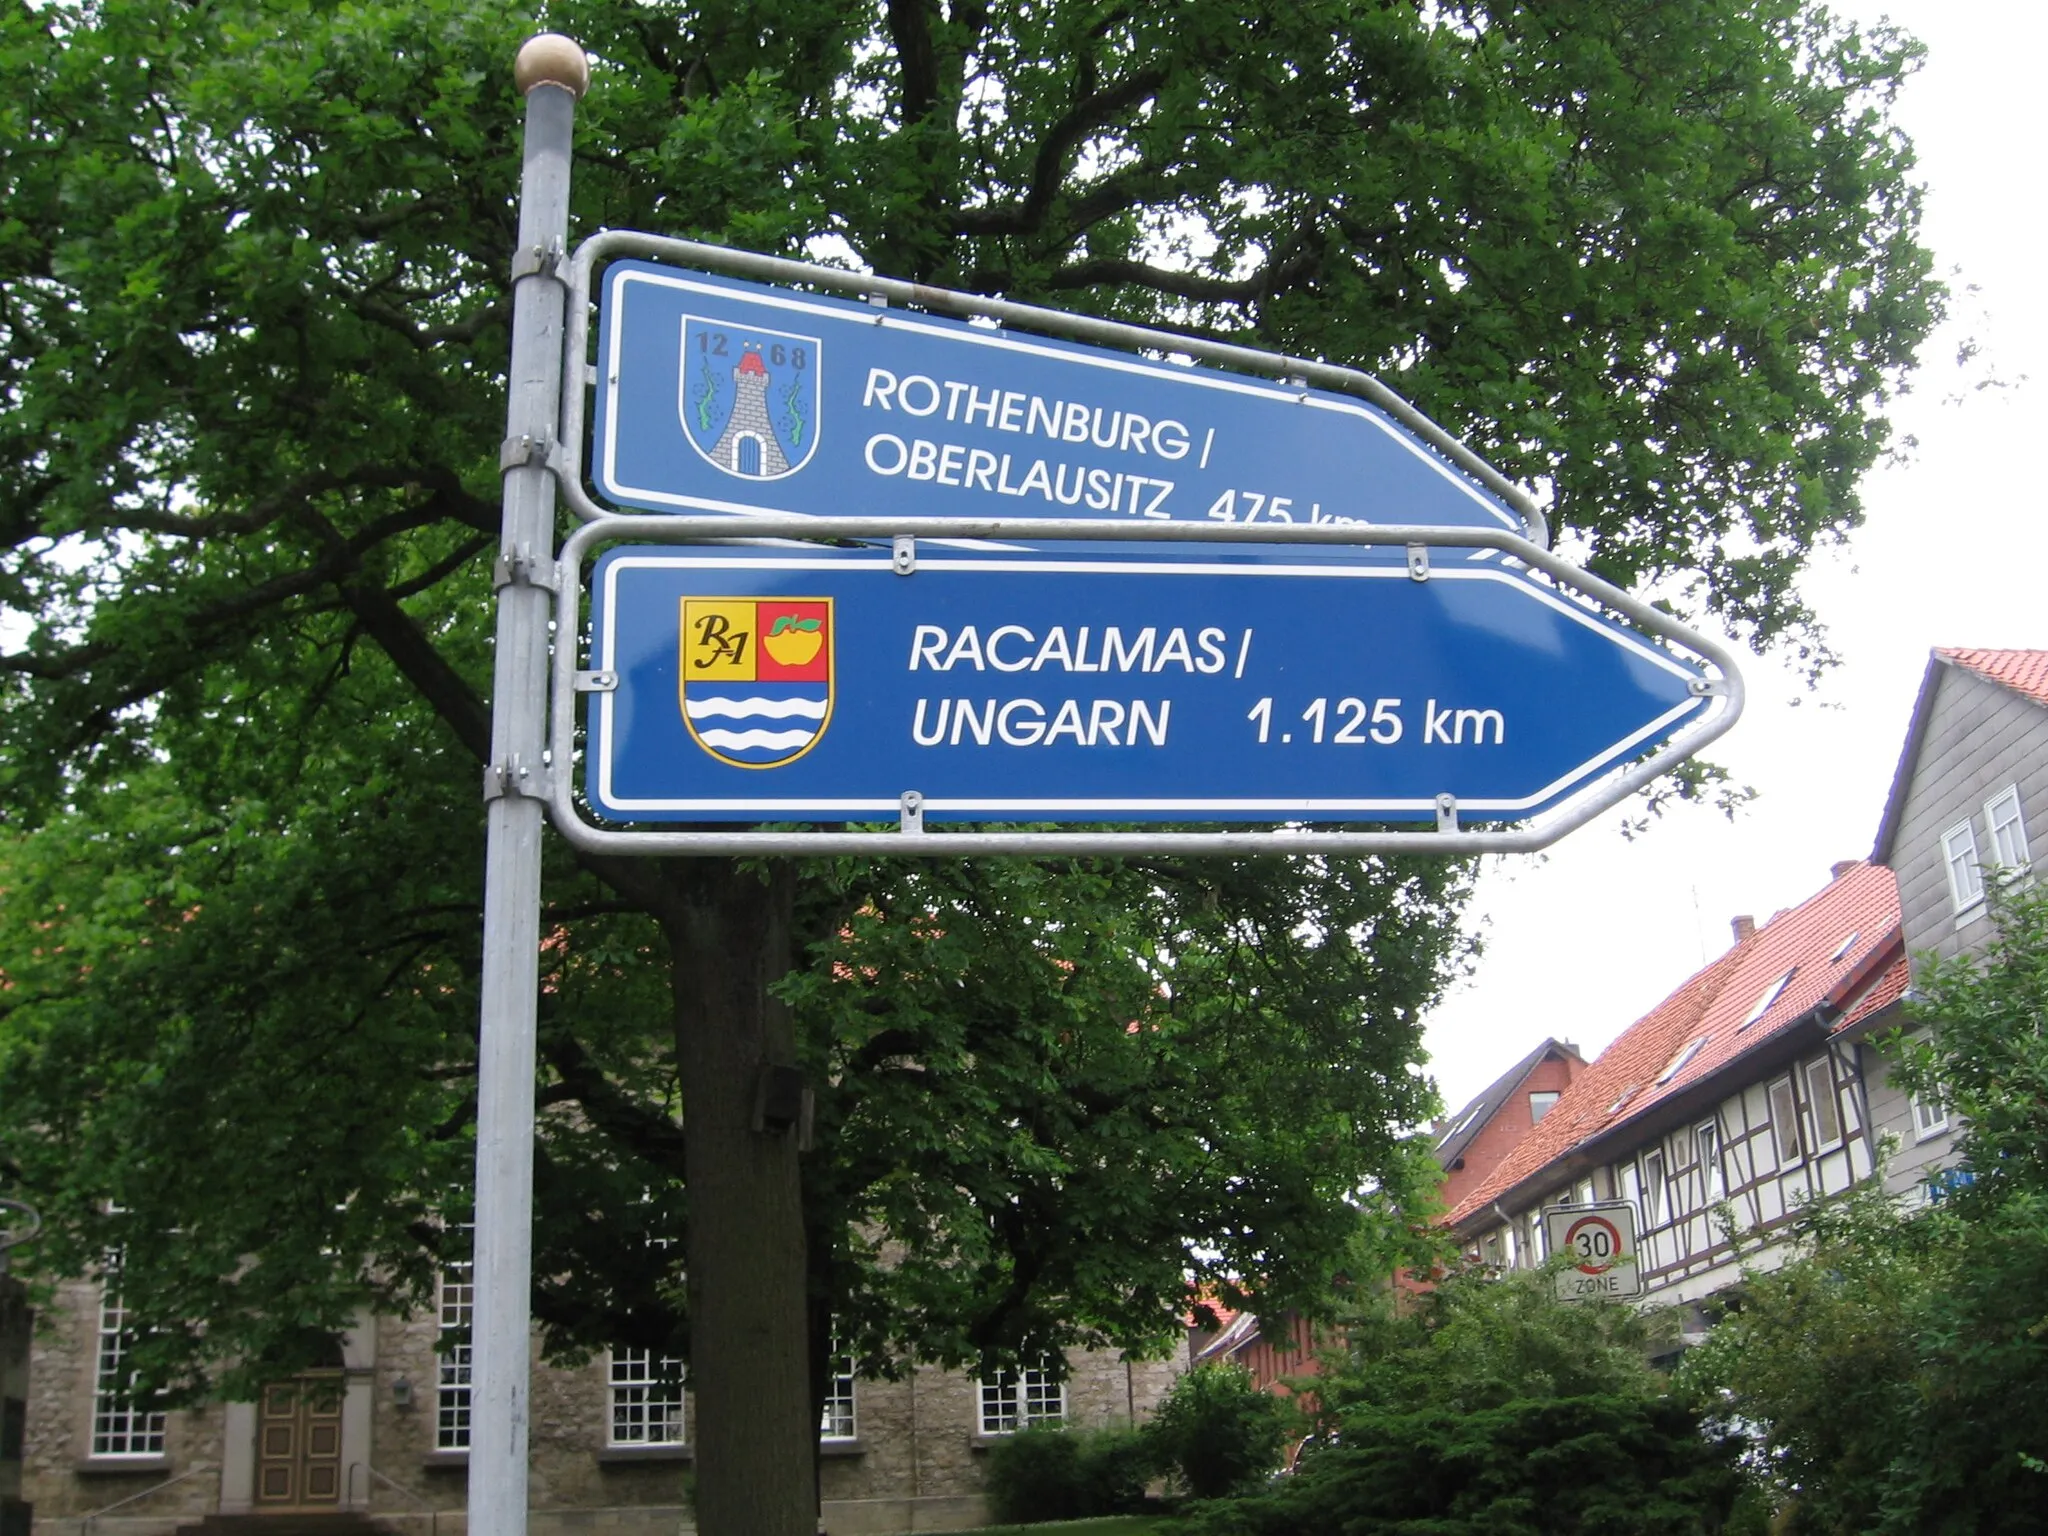 Photo showing: A sign in the German city Dransfeld showing that the city has Town twinnings with Rothenburg/Oberlausitz and Rácalmás (Hungary).